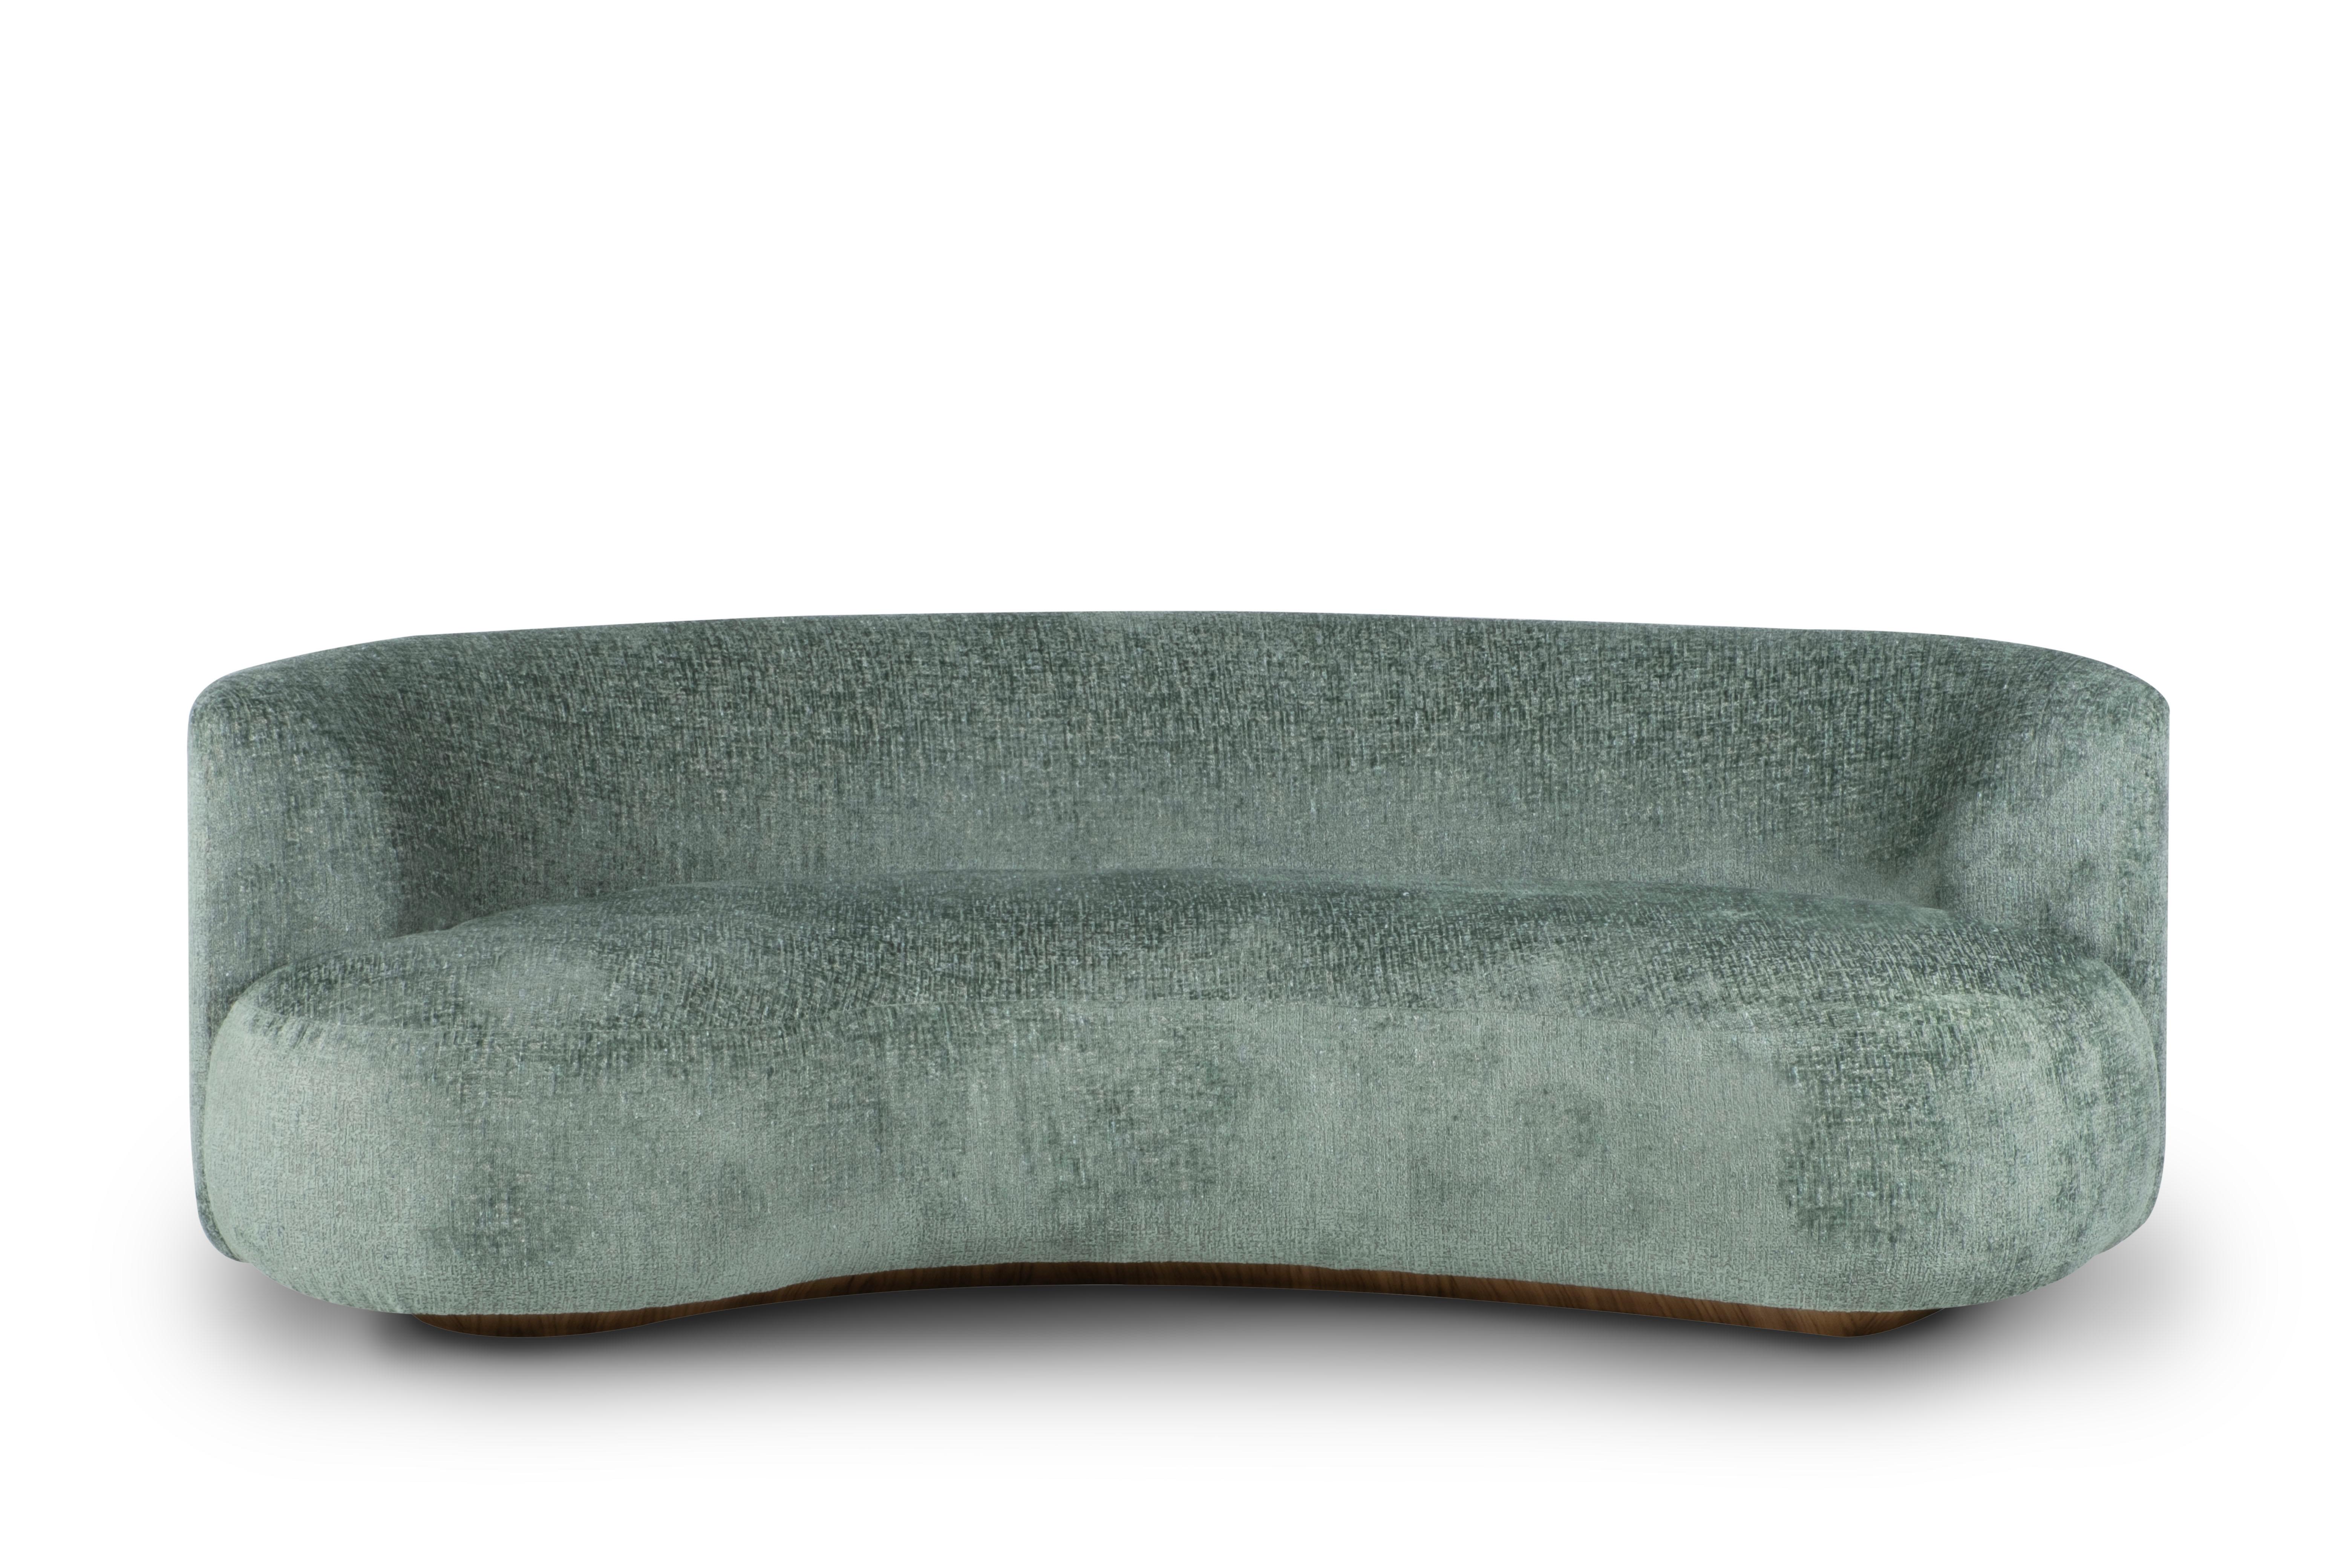 Twins Sofa, Contemporary Collection, Handcrafted in Portugal - Europe by Greenapple.

Designed by Rute Martins for the Contemporary Collection, the Twins curved couch and day bed share the same genes, yet each possesses a distinct design, creating a